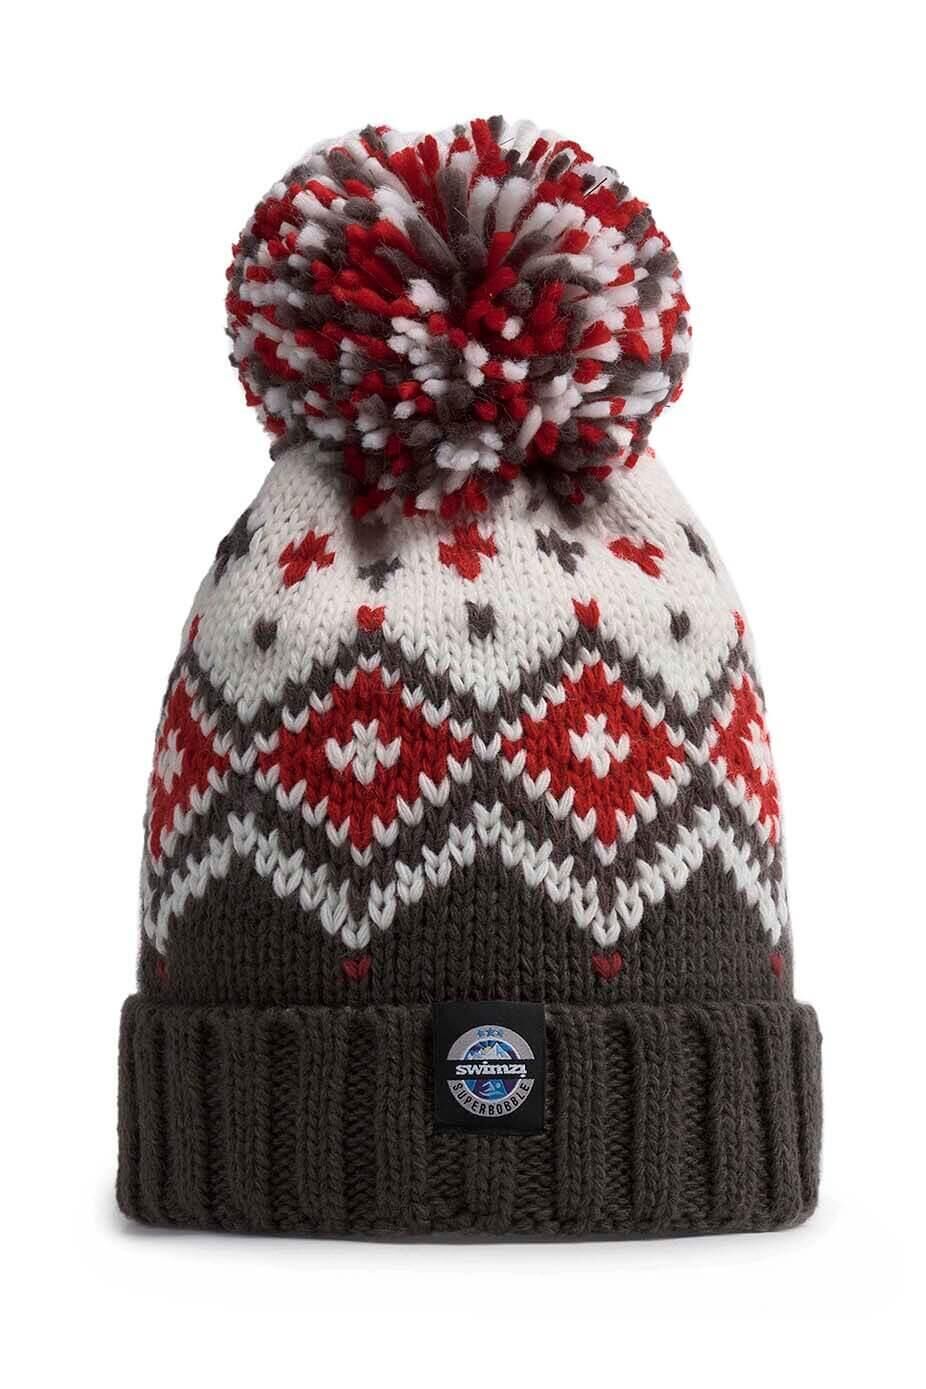 SWIMZI Graphite Red Tyrol Nordic Knit Reflective Superbobble Hat